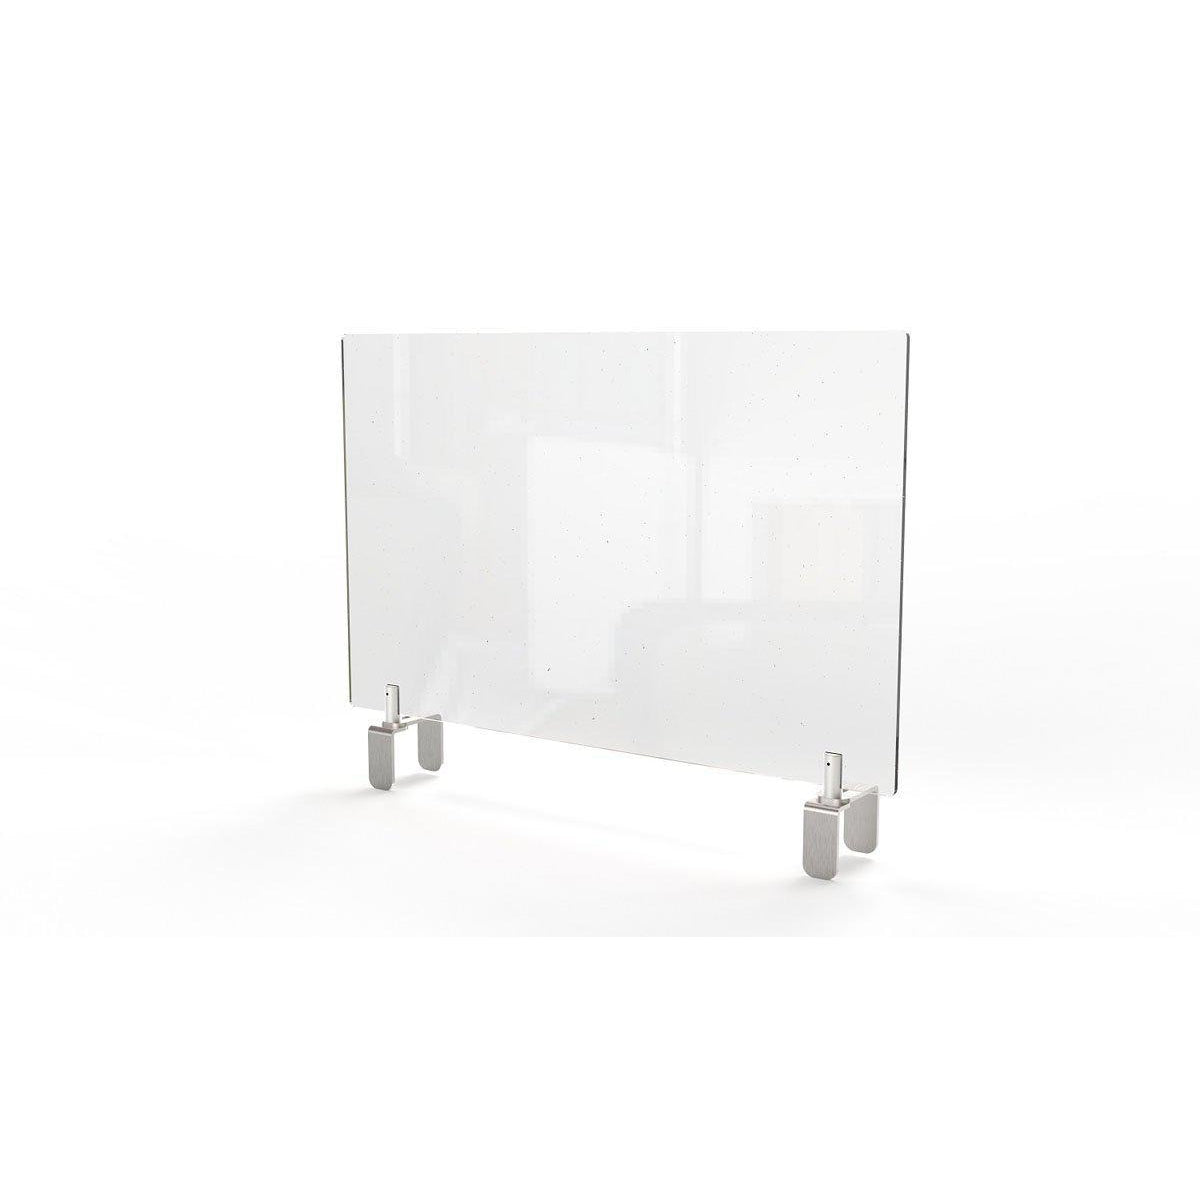 Clear Thermoplastic Partition & Cubicle Extender with Adjustable Clamp Attachment, 18"H x 29"W